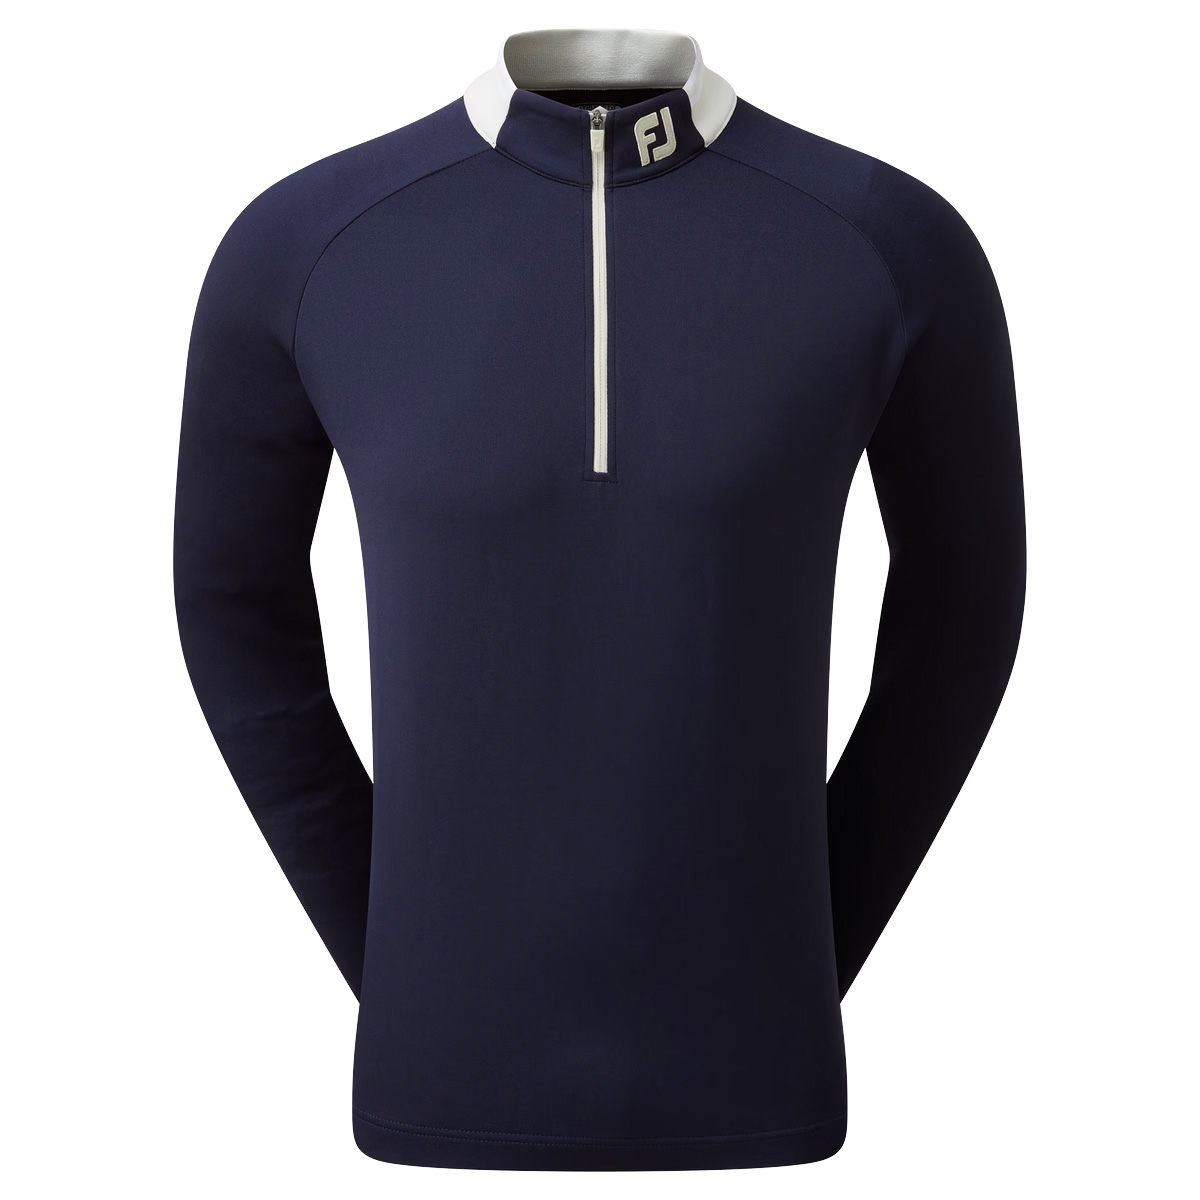 FootJoy Rib Trim Chill Out Mens Golf Pullover  - Navy/Almond